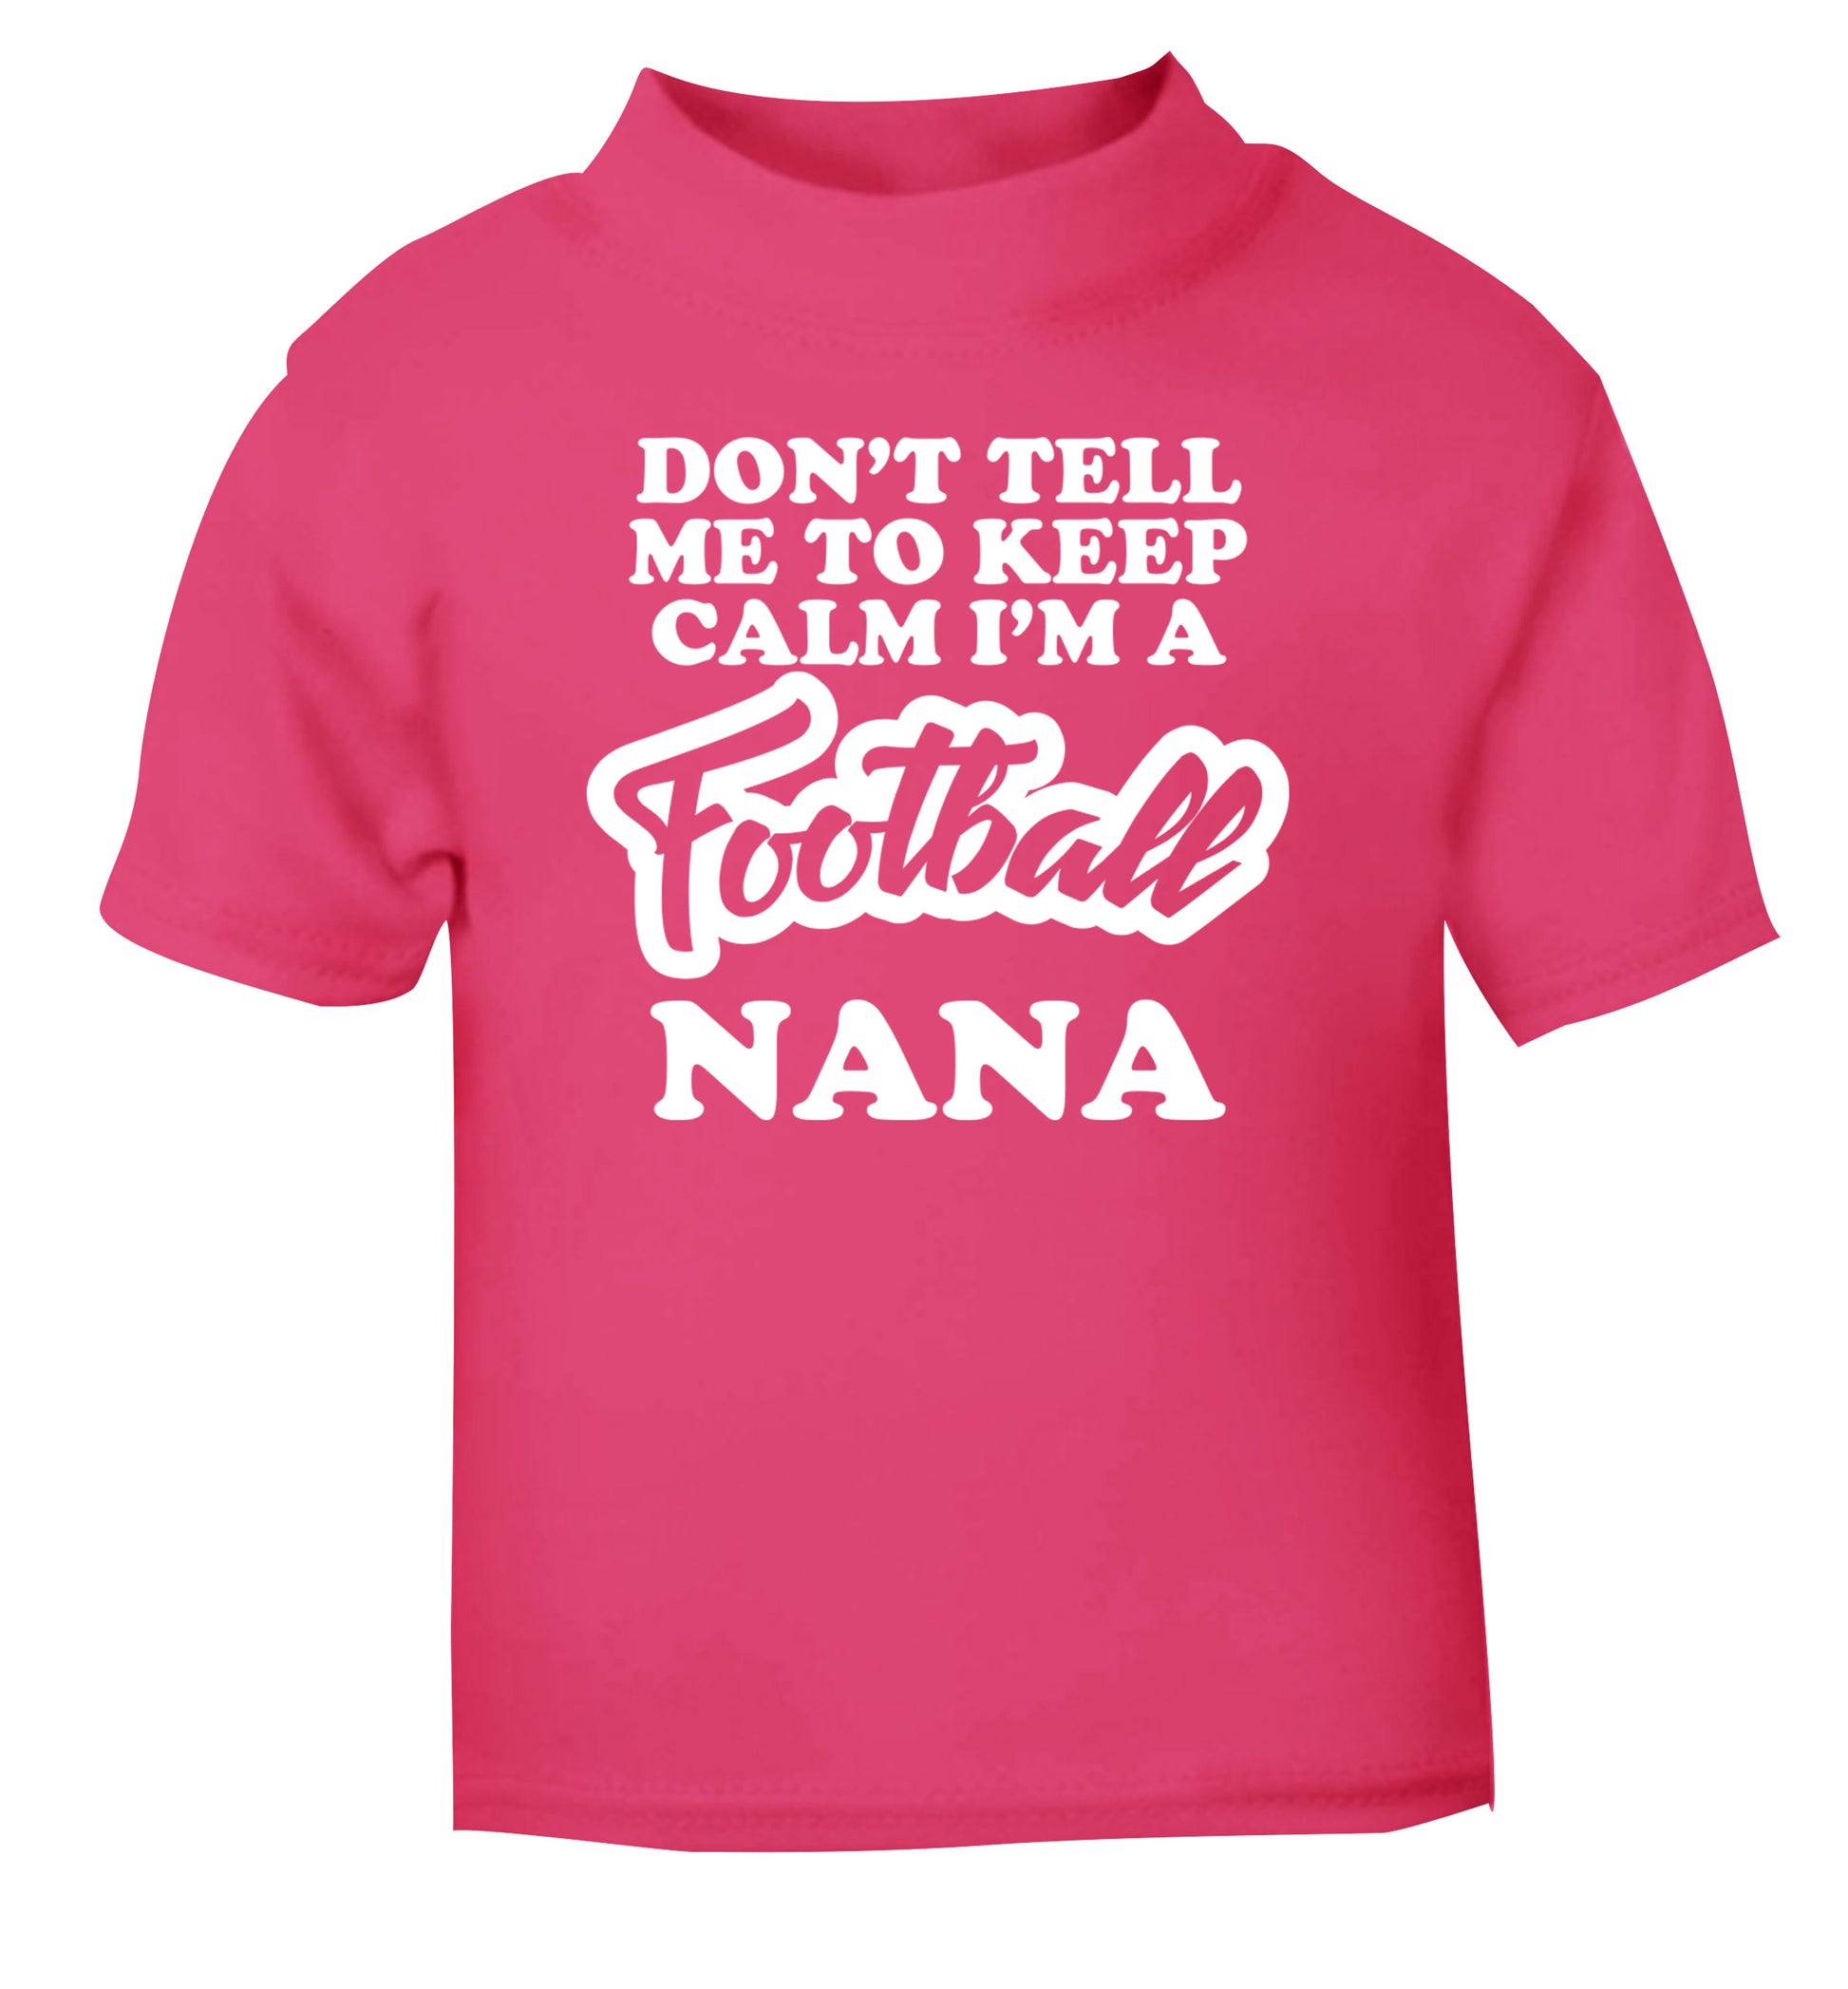 Don't tell me to keep calm I'm a football nana pink Baby Toddler Tshirt 2 Years